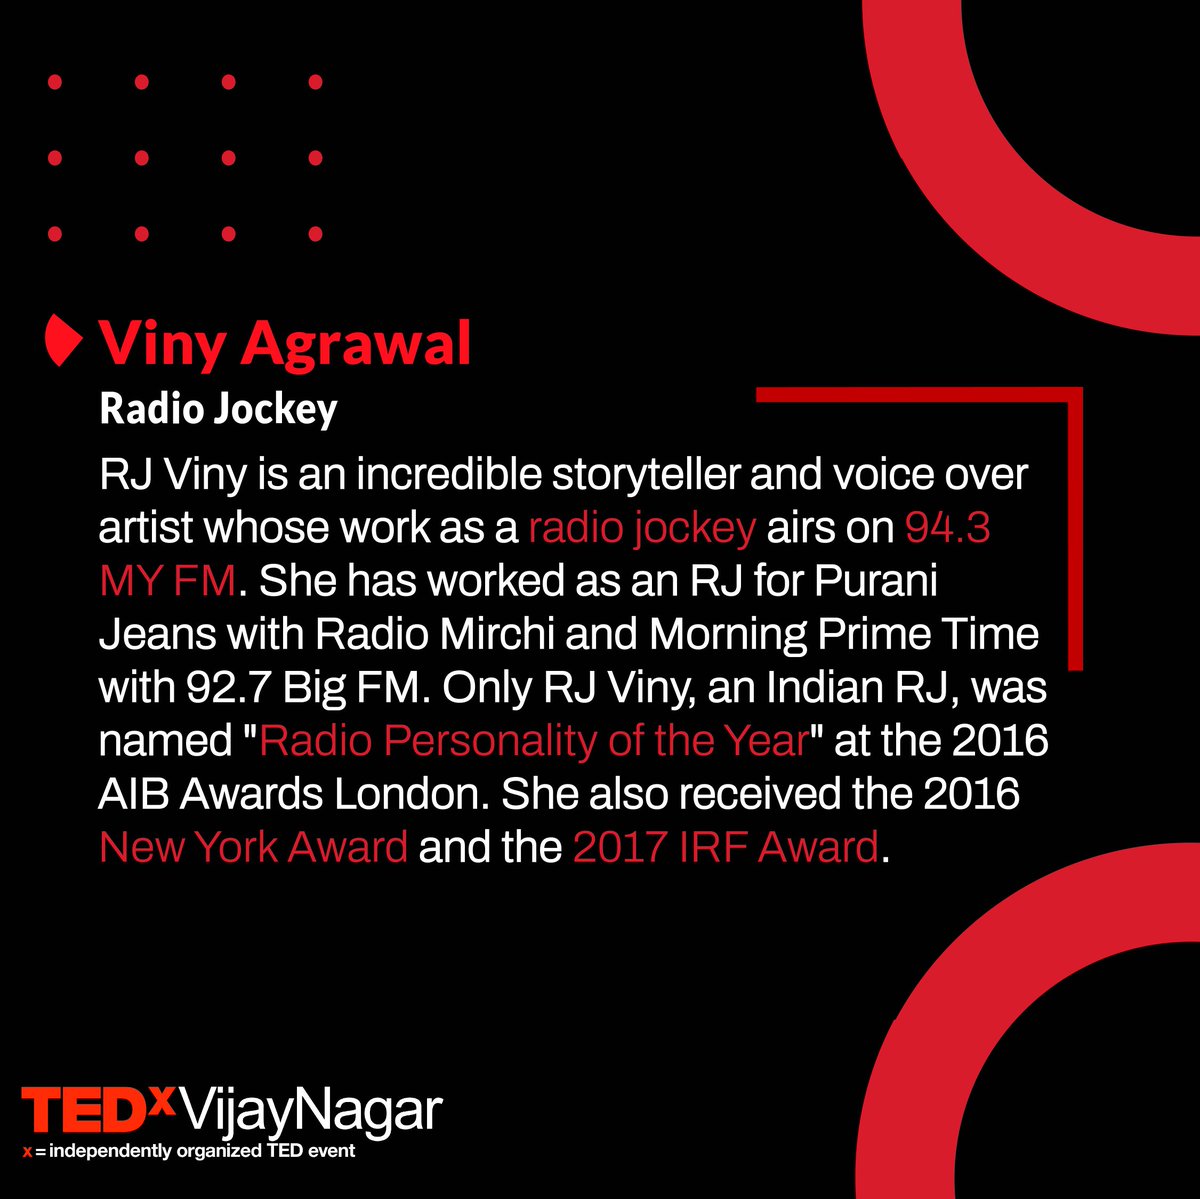 She is the Only Indian RJ to win AIB 'Radio Personality of the Year' Award London in 2016 & many prestigious award like IRF 2017 and R4C Award UNICEF.
RJ Viny from Salaam Indore Host Show 94.3 My FM is a stunning motivational speaker has always impacted people.
#TEDxVijaynagar